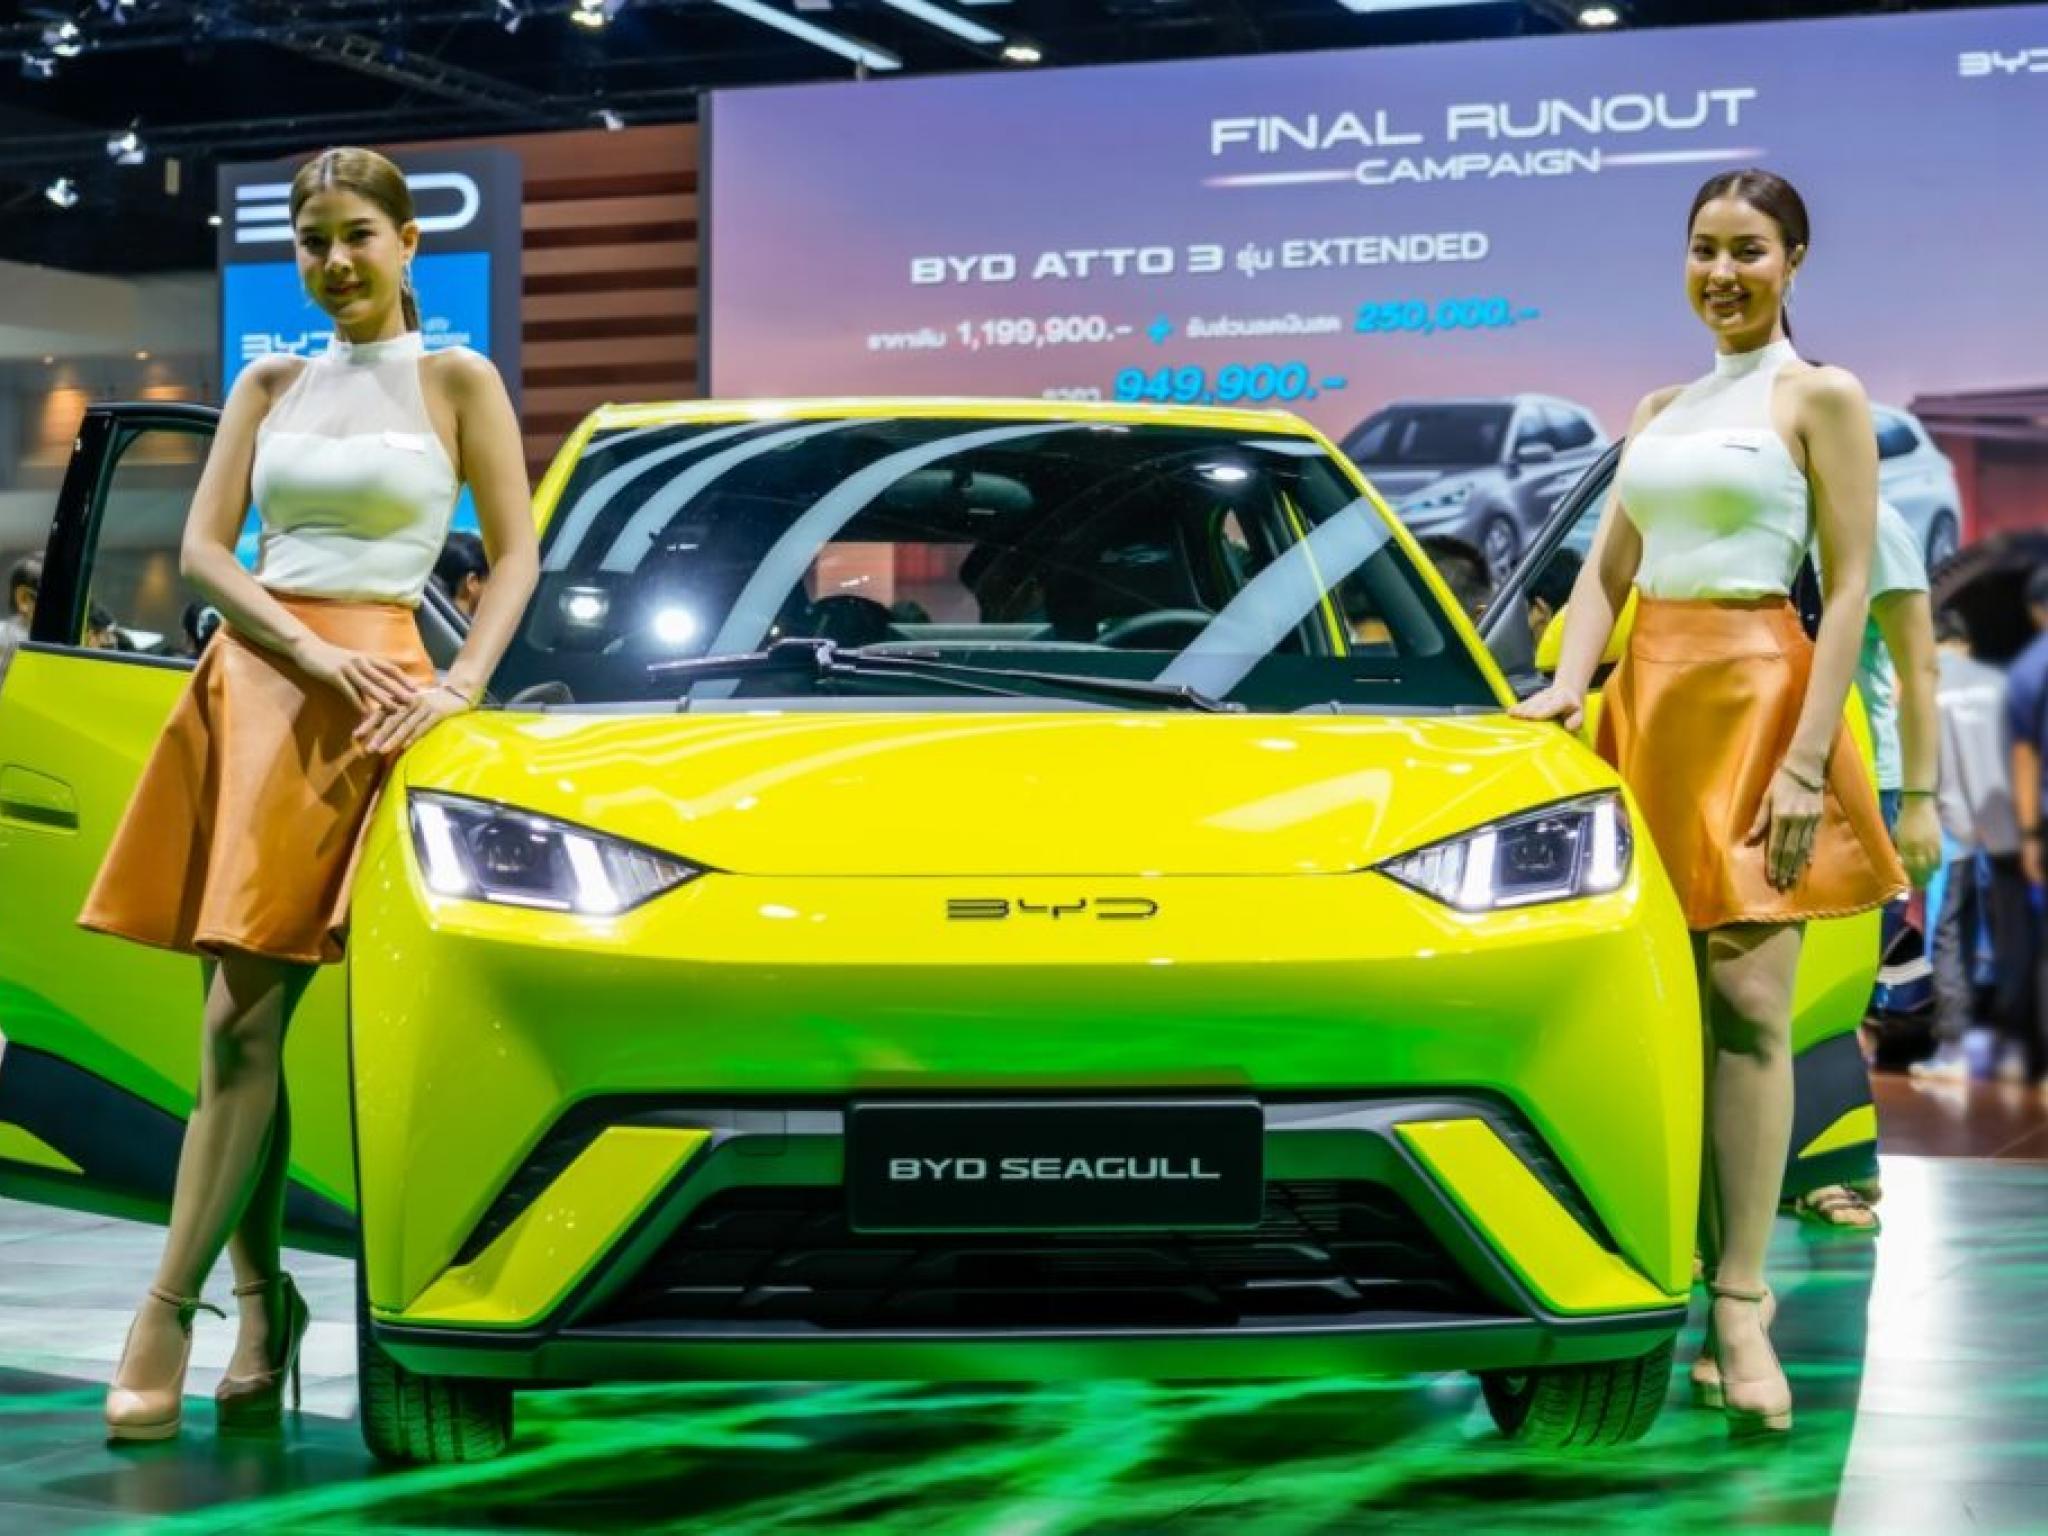  tesla-killer-lands-in-europe-byds-seagull-ev-poised-to-disrupt-with-sub-21k-price-tag-even-after-tough-tariffs 